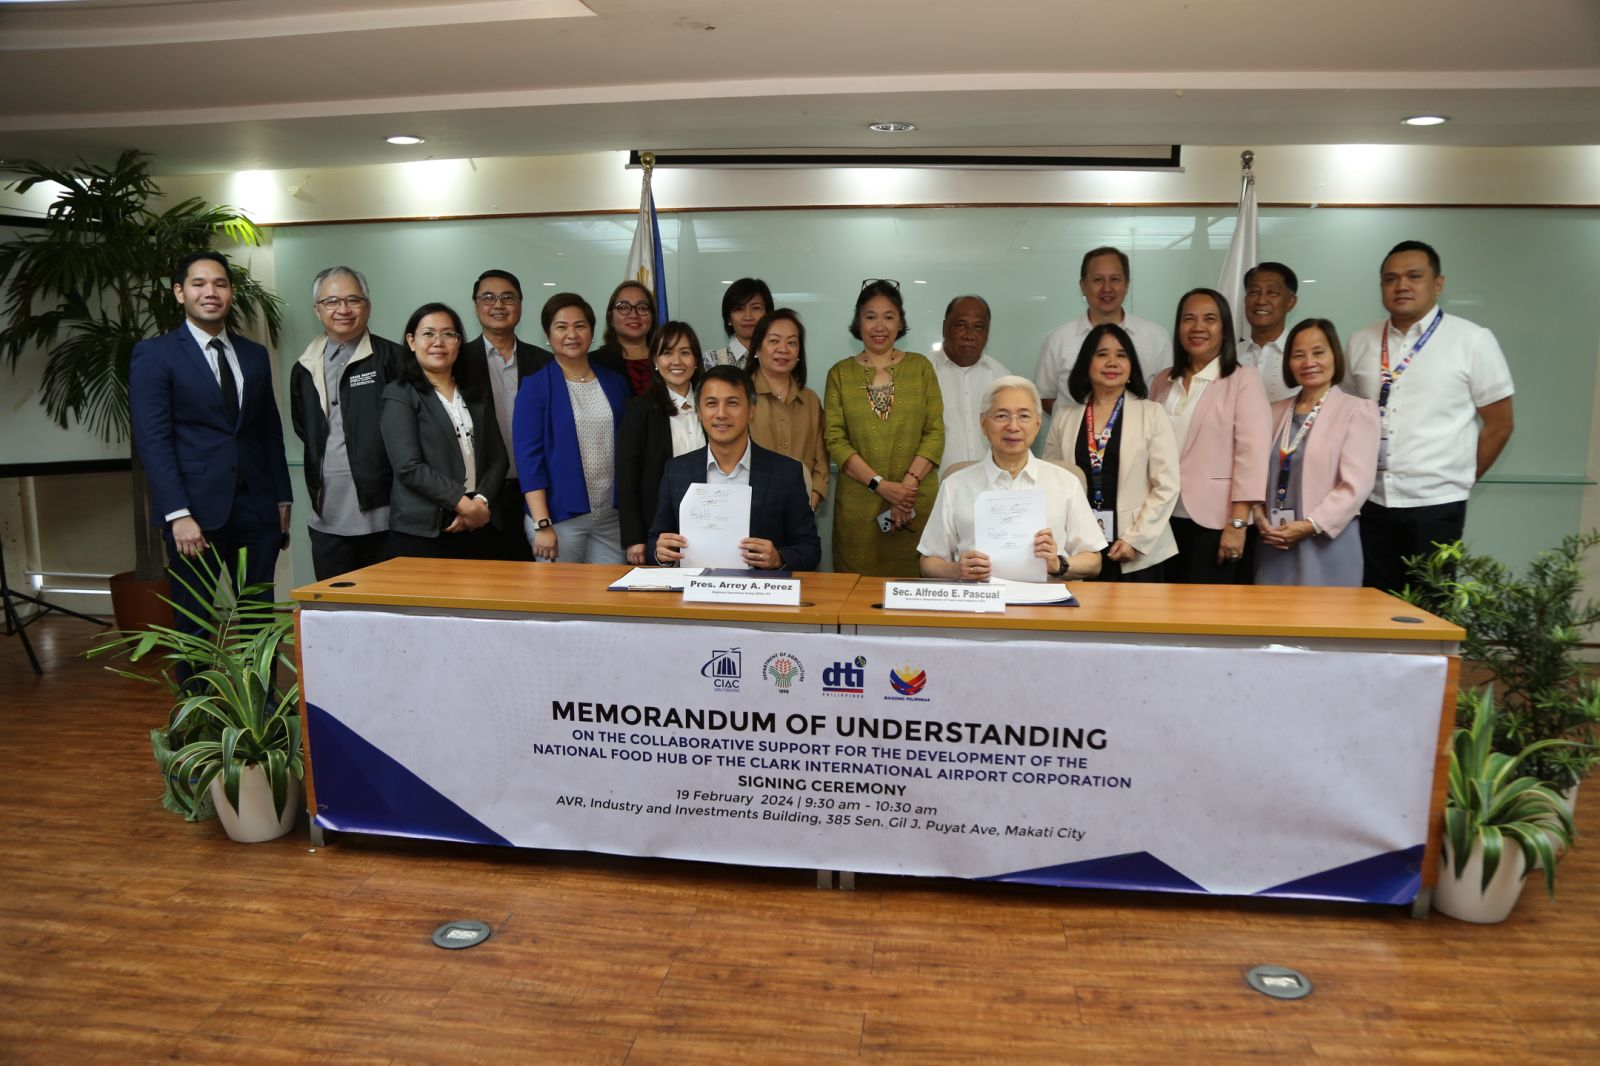 Department of Trade and Industry Secretary Fred Pascual and Clark International Airport Corporation (CIAC) President Array Perez signed a Memorandum of Understanding (MOU) on 19 February in Makati to formalize collaborative support for the National Food Hub development in the CIAC compound in Pampanga